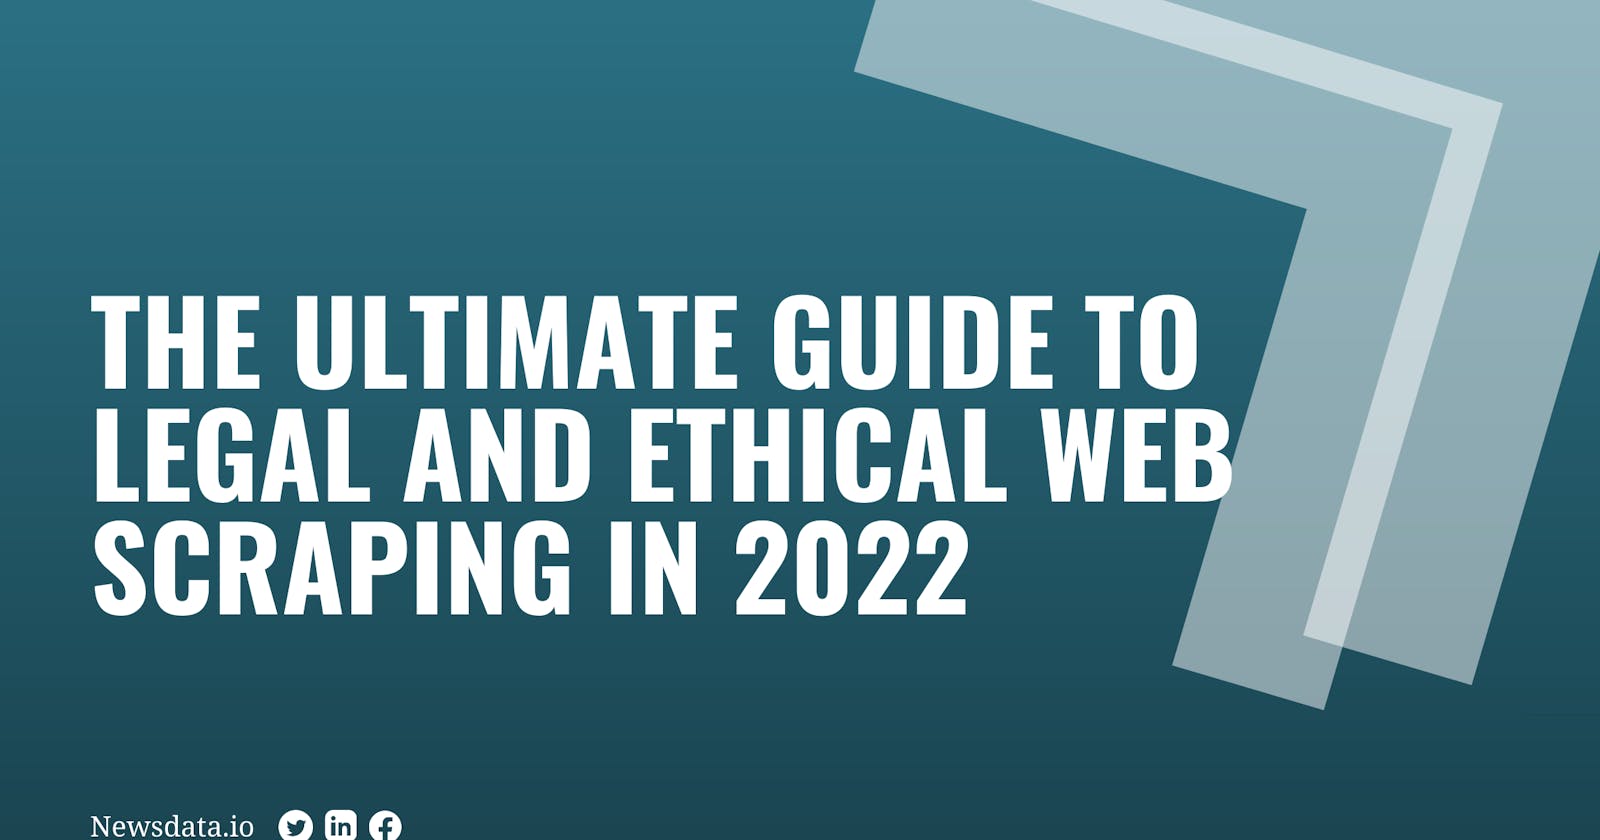 The Ultimate Guide to Legal and Ethical Web Scraping in 2022